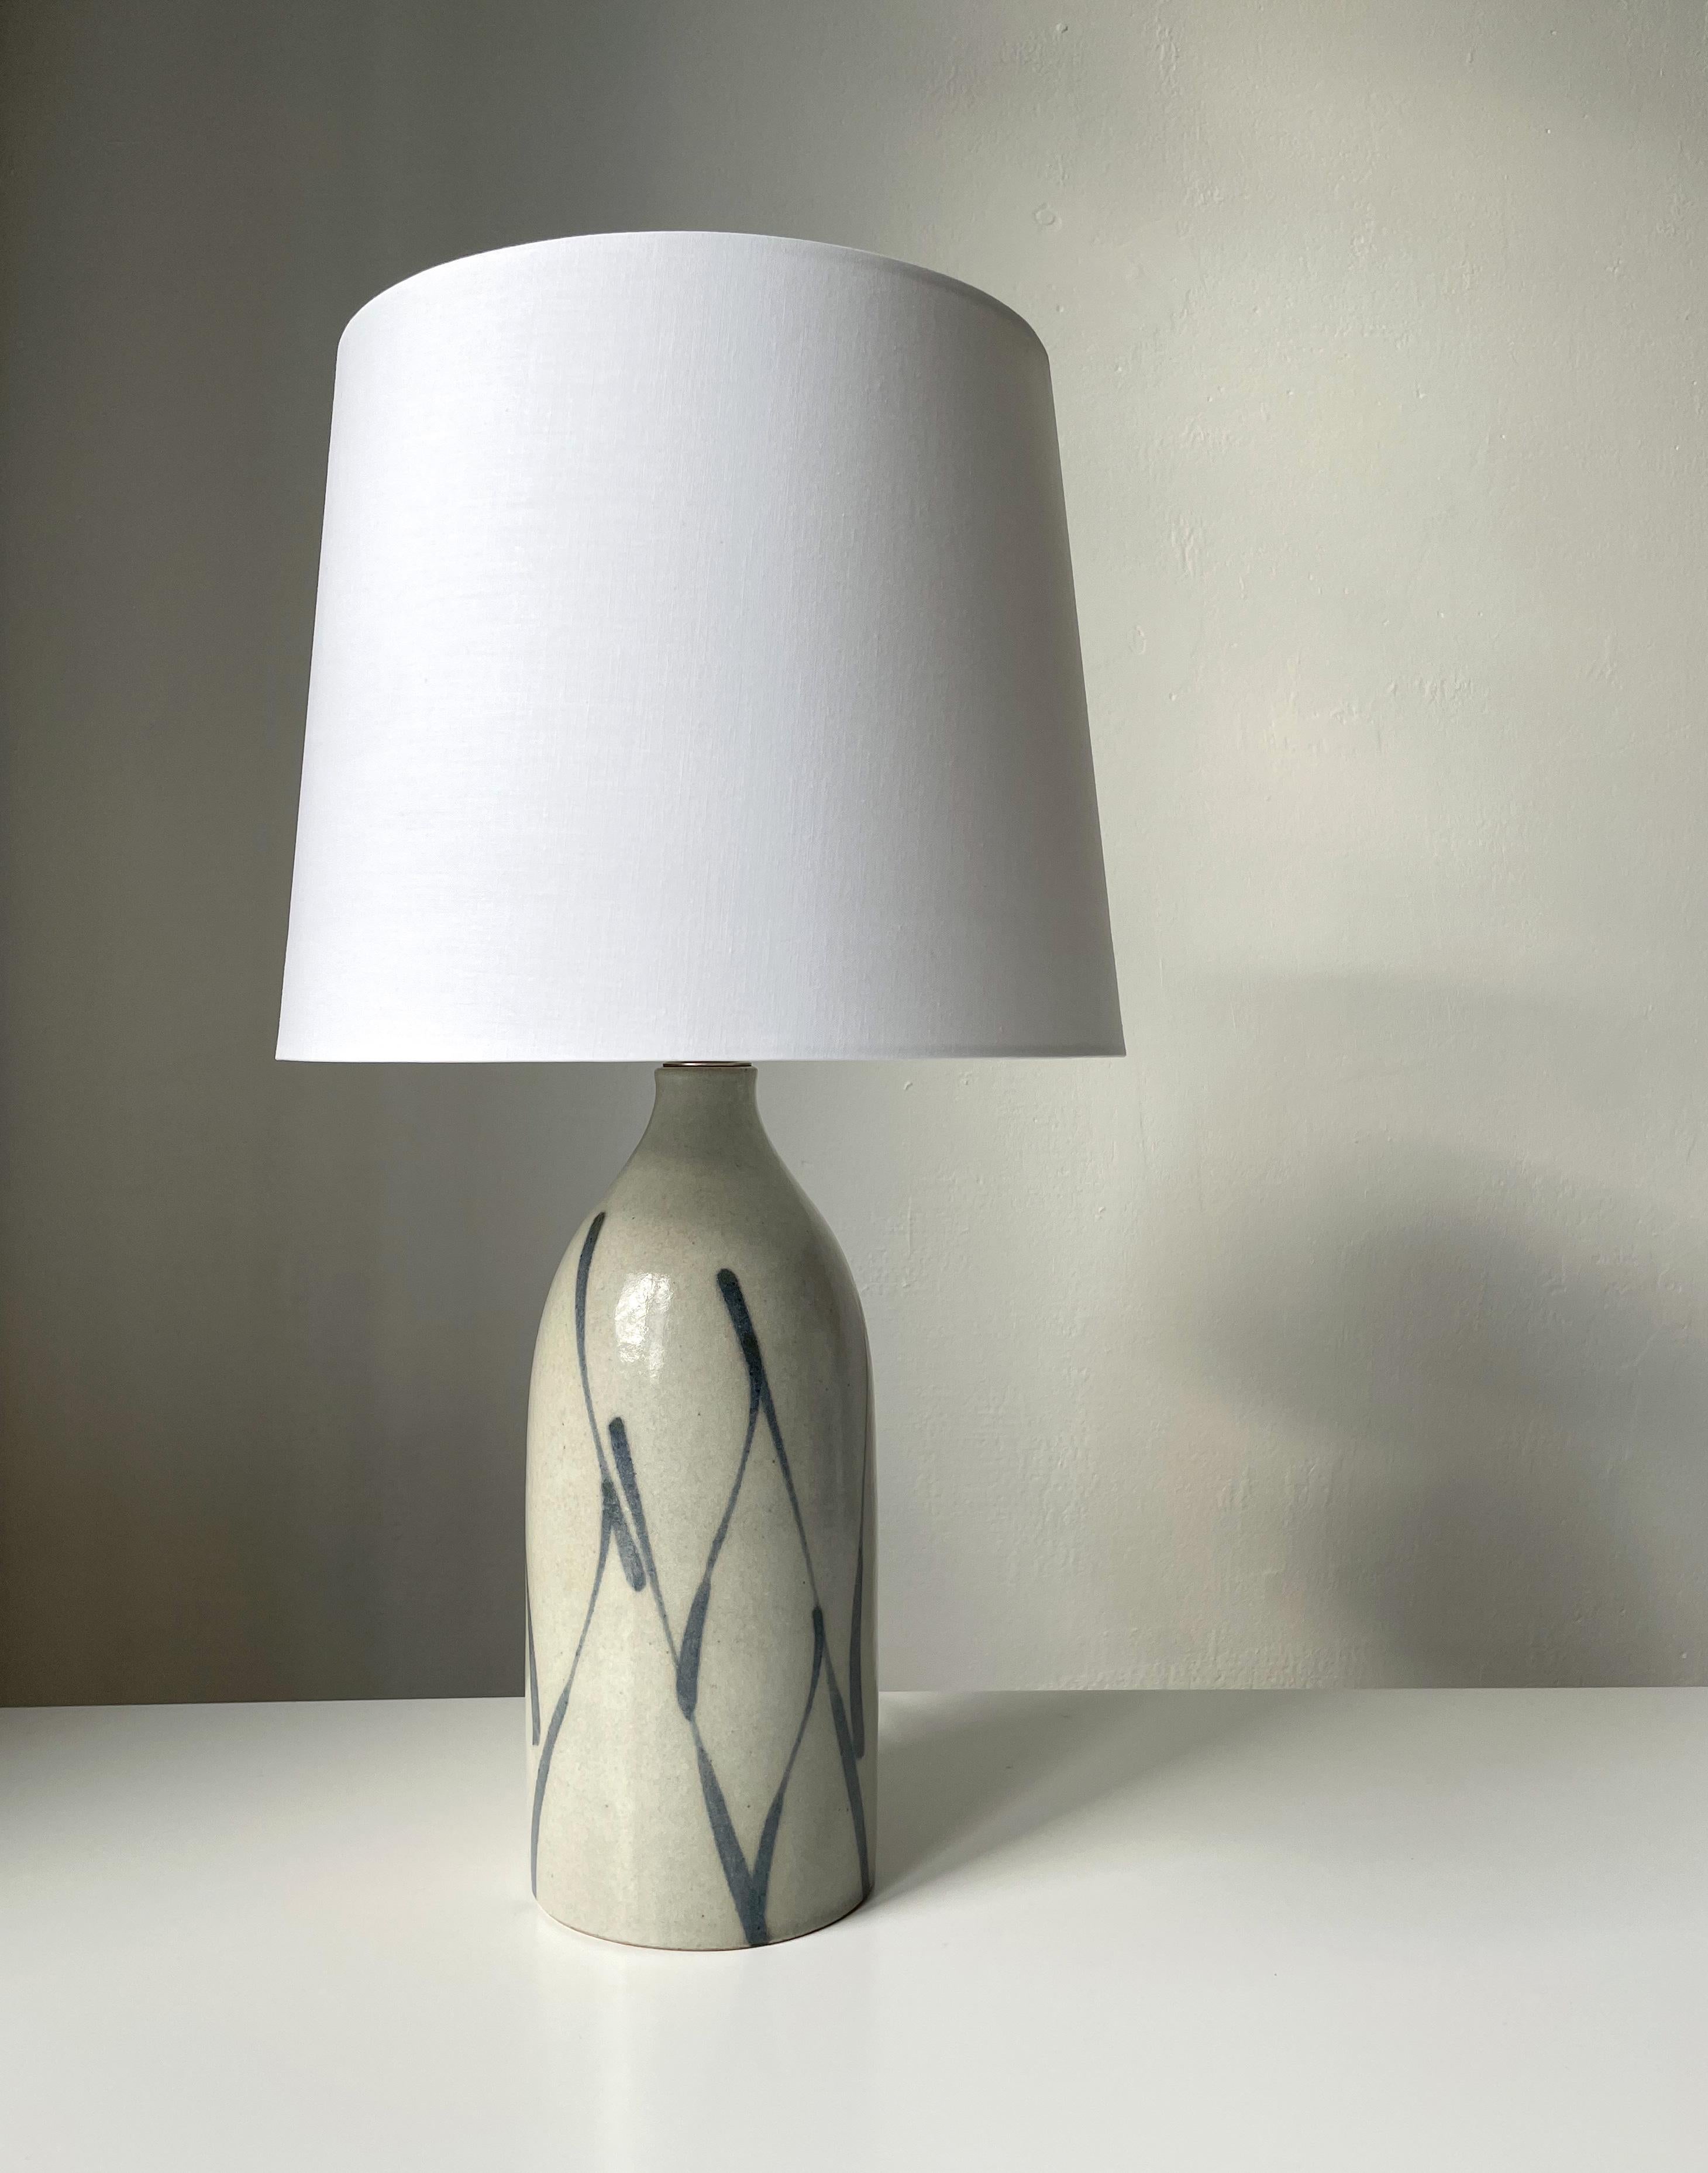 Warm grey glazed ceramic table lamp with darker grey soft, hand-painted, asymmetrical lines from top to bottom of the heavy, smooth bottle shaped body. Brass top. Manufactured by Kähler Keramik in the town of Naestved in the 1960s. Signed and